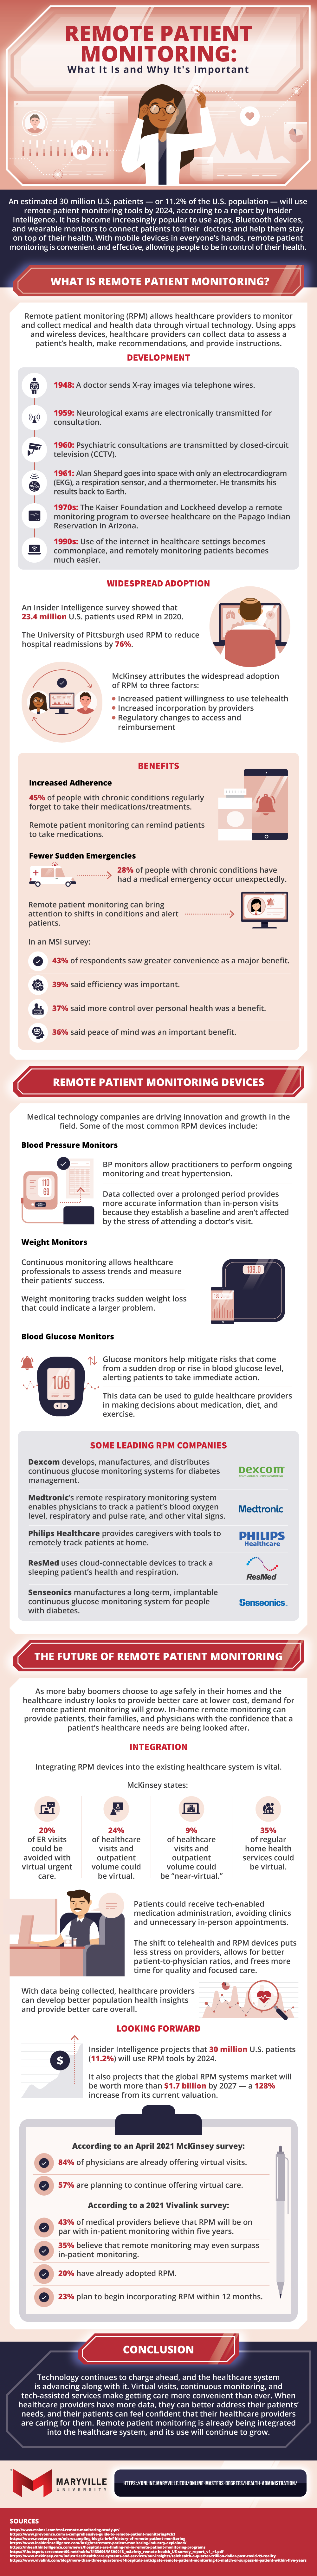 What remote patient monitoring is, how it works in healthcare, and its many important, beneficial uses.